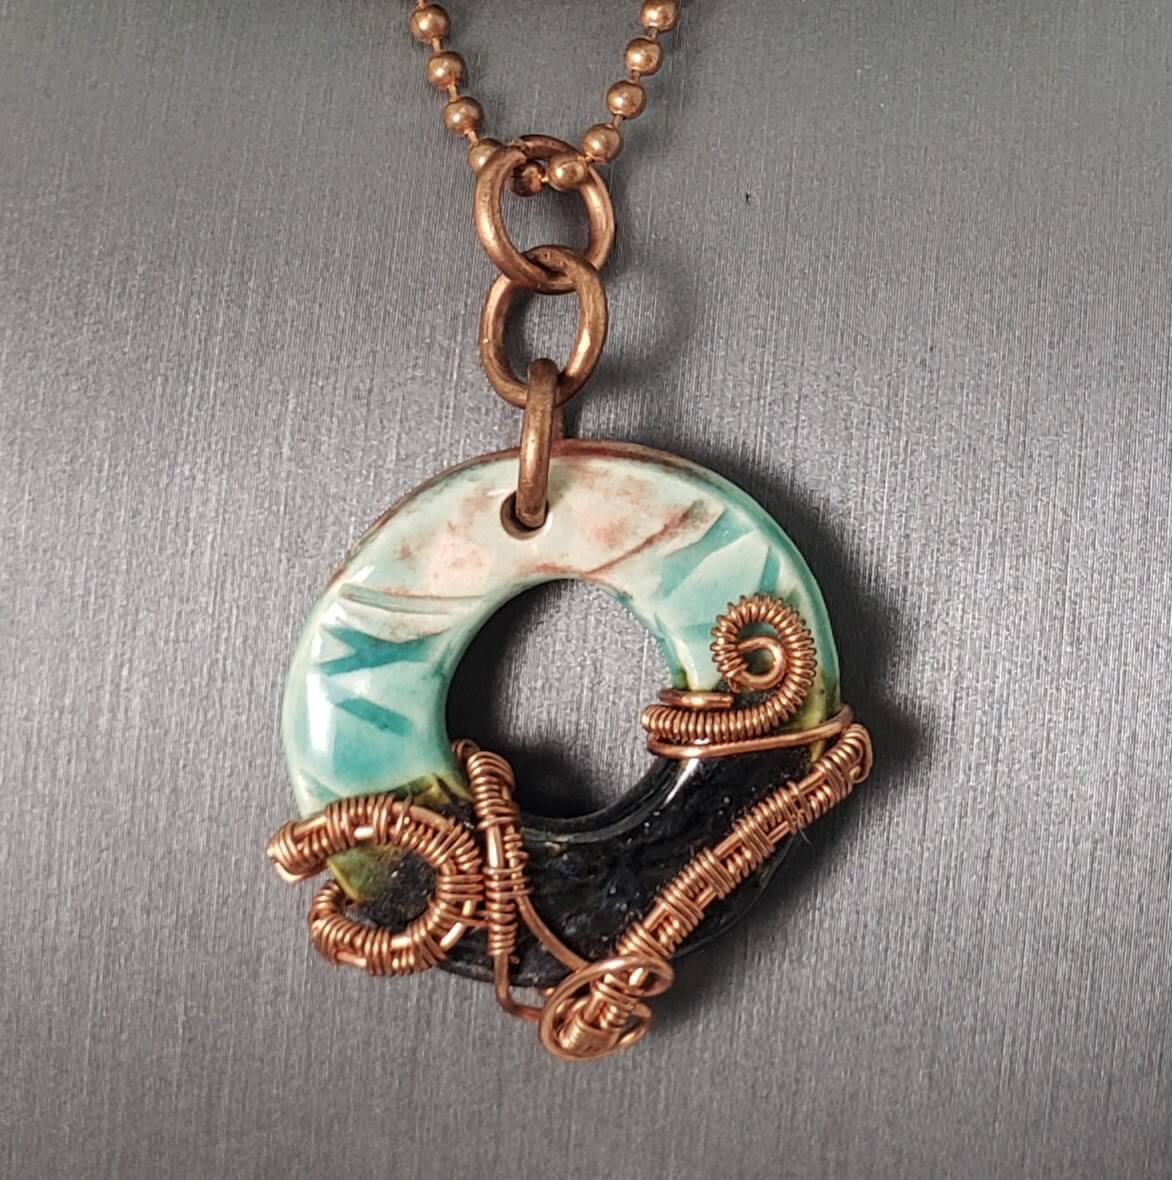 Glazed Pottery Doughnut Copper Woven Pendant - Mother Of Metal - For Her - For Necks - -Necklaces